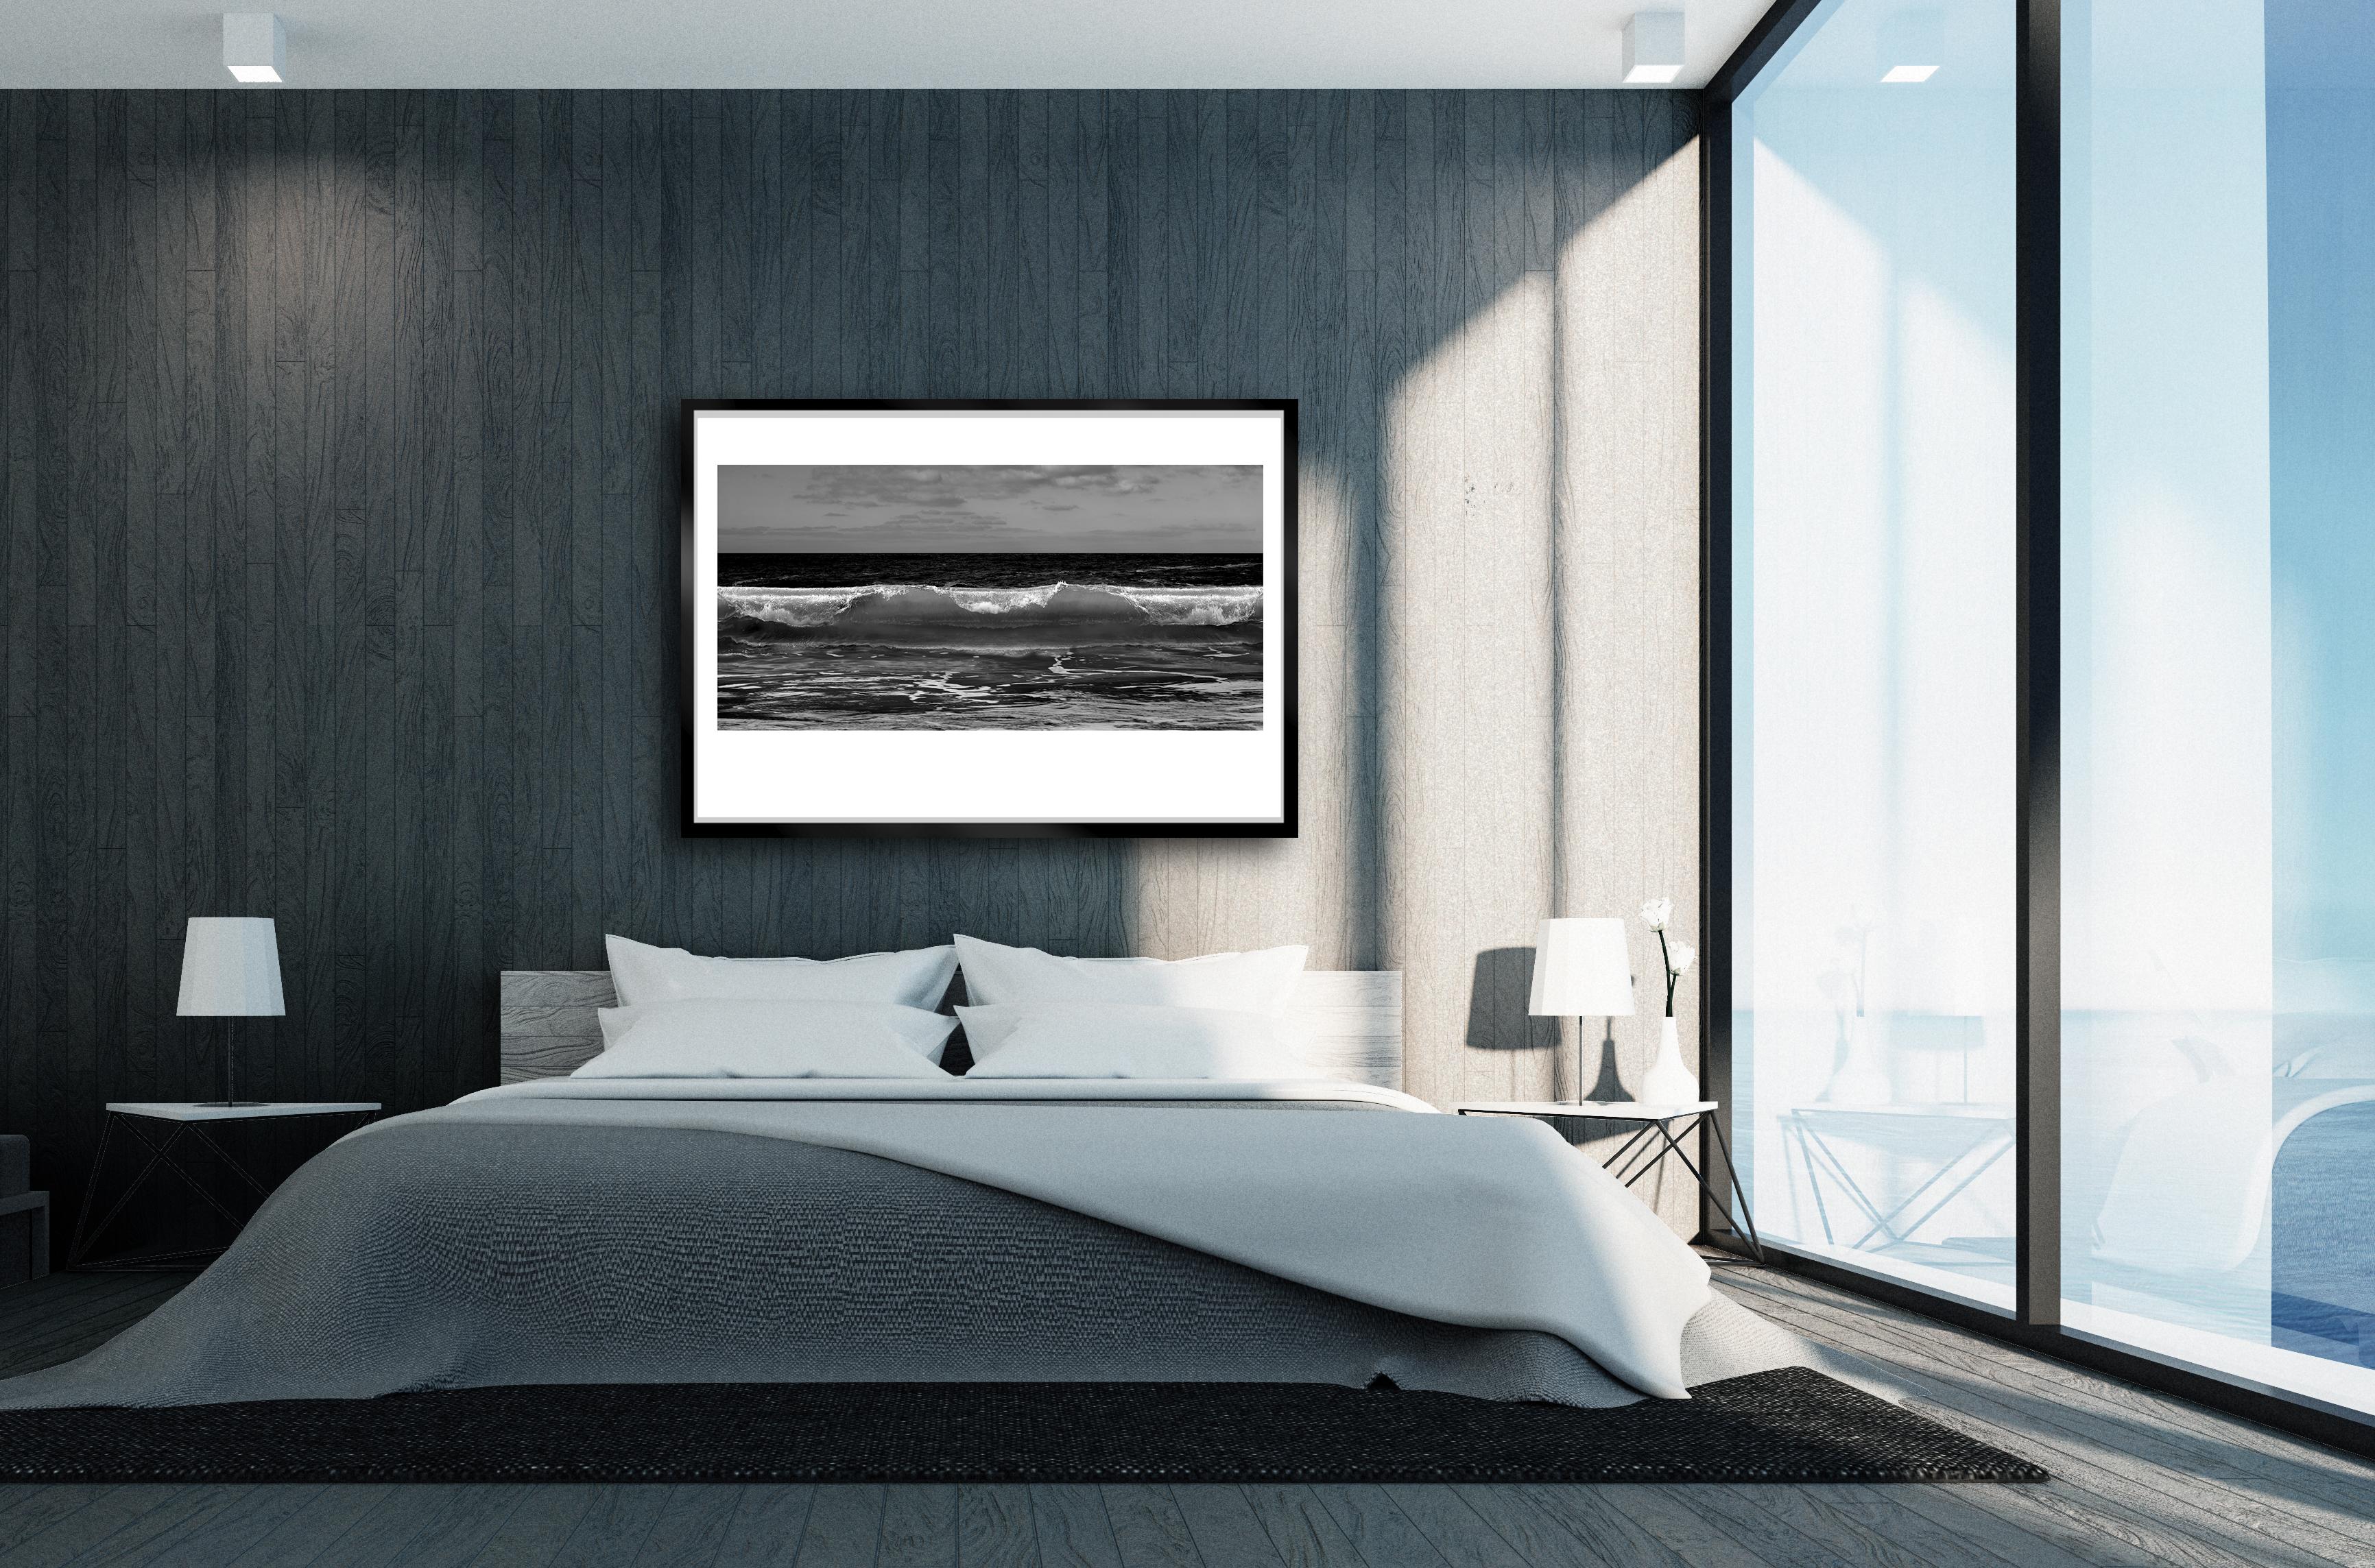 Wave- Signed limited edition print, Black white, Movement, Sea, Water, Nature - Photograph by Ian Sanderson